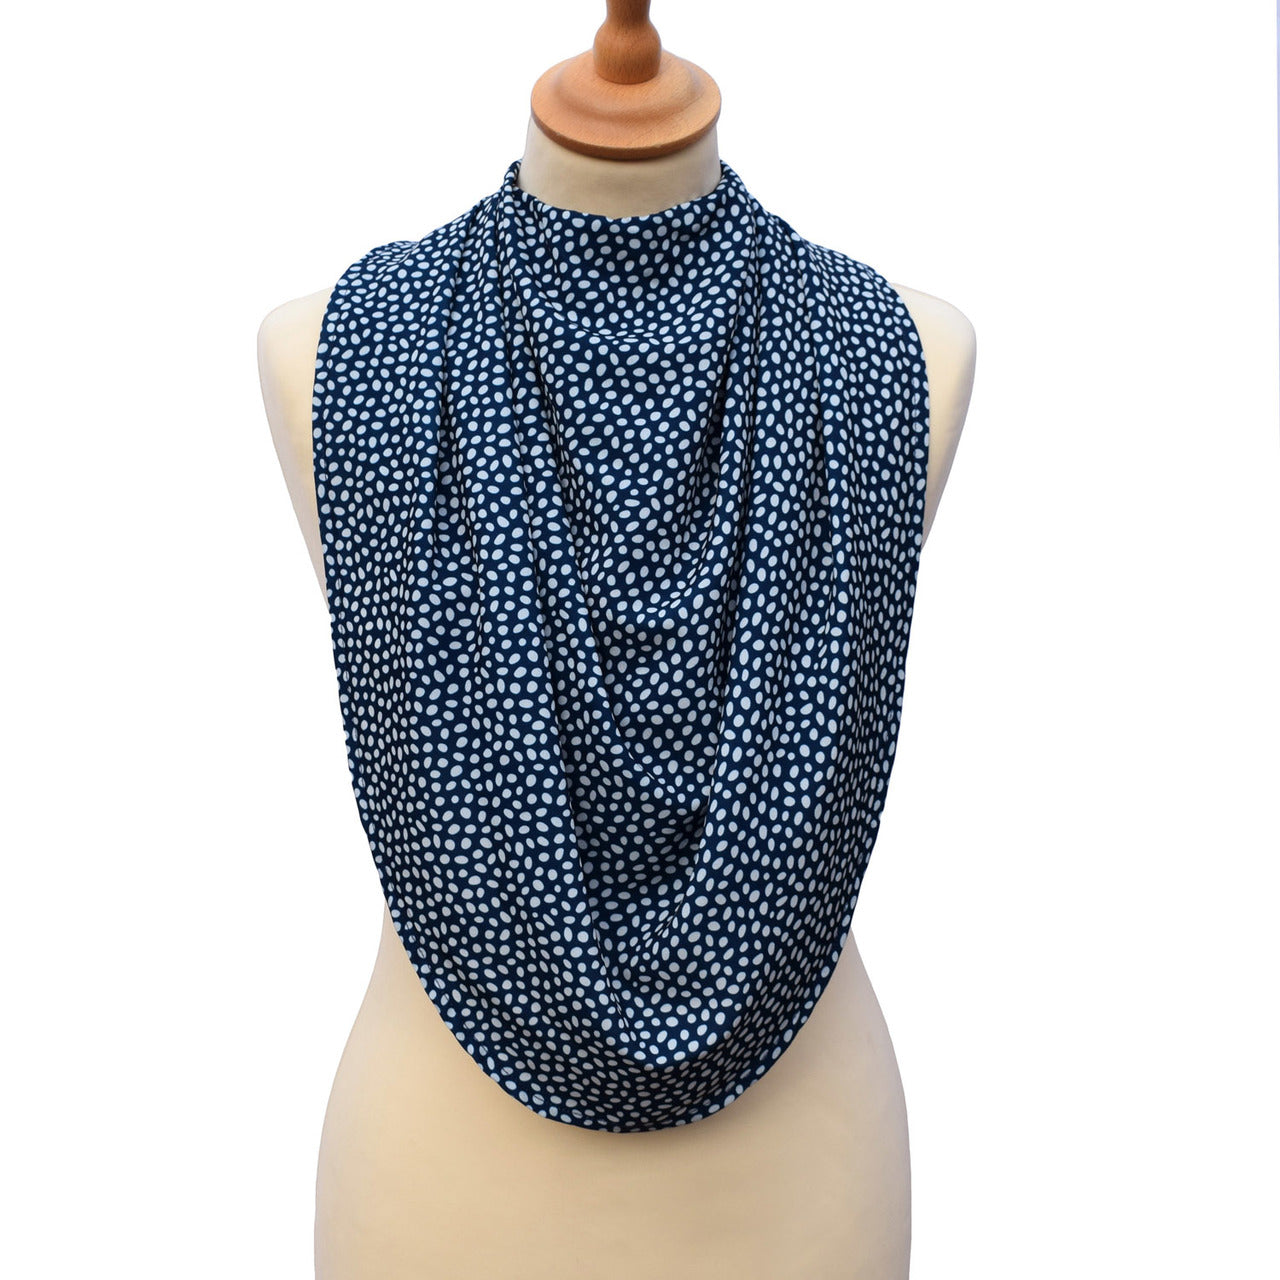 Pashmina scarf style clothing protector - Navy Dot | Health Care | Care Designs